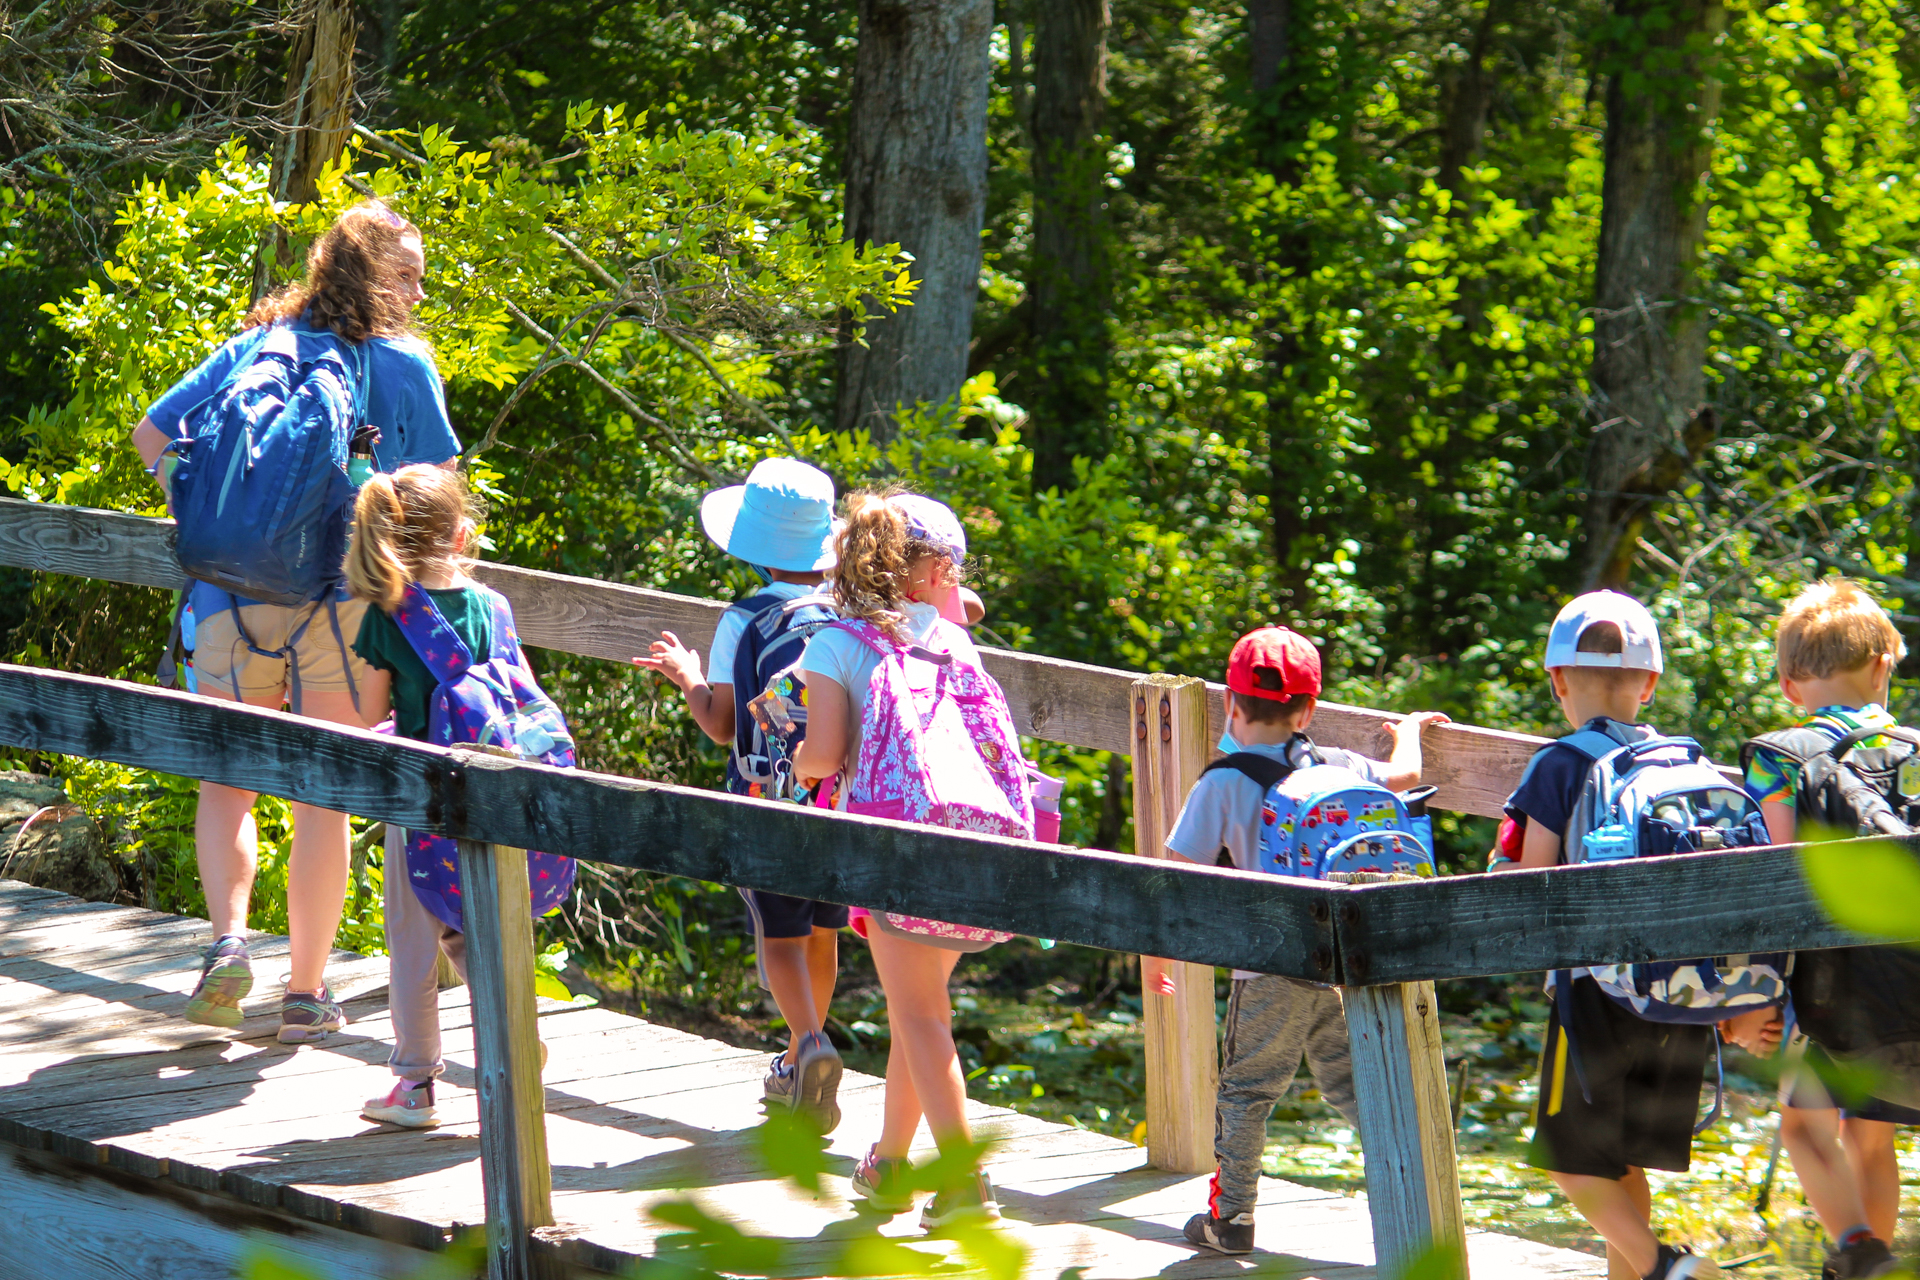 A line of Broadmoor campers wearing colorful backpacks follow their counselor along a wooden boardwalk